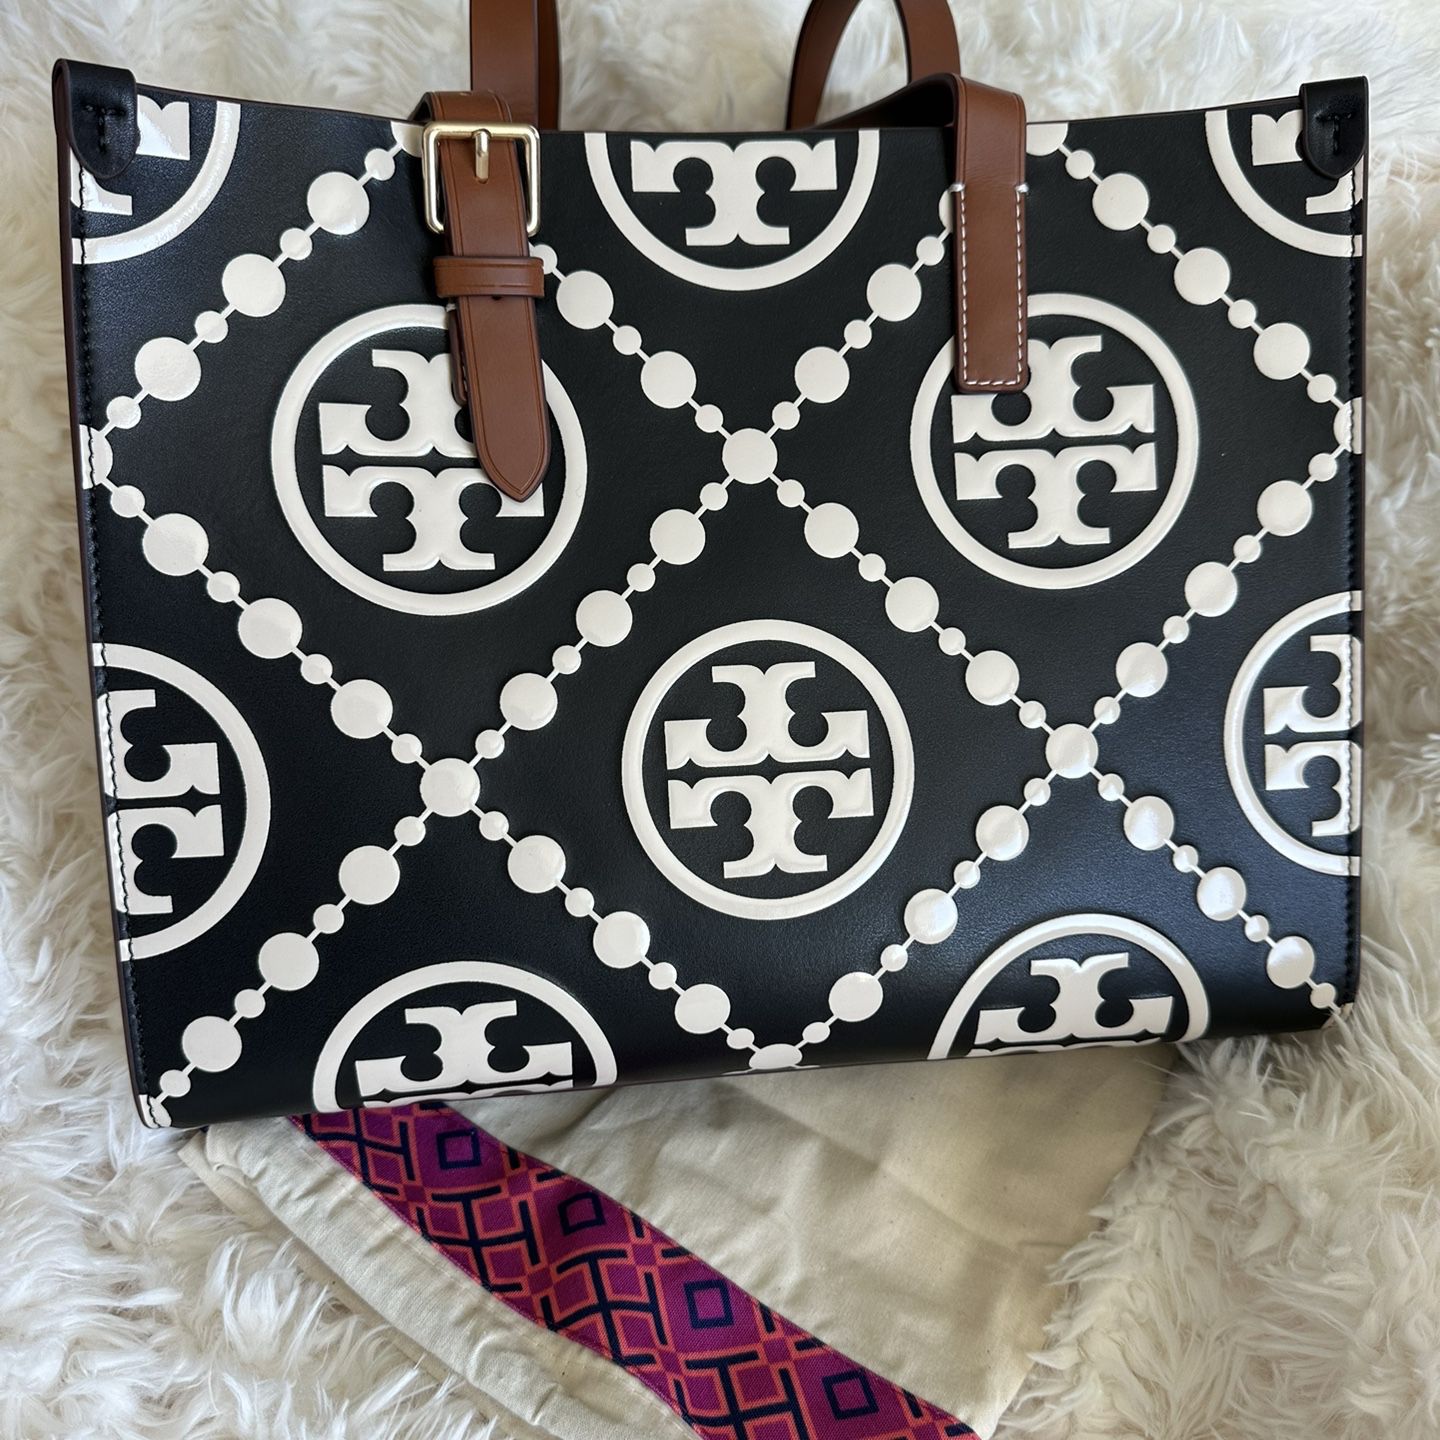 SALE!! NEW Authentic Tory Burch Small Embossed Tote 